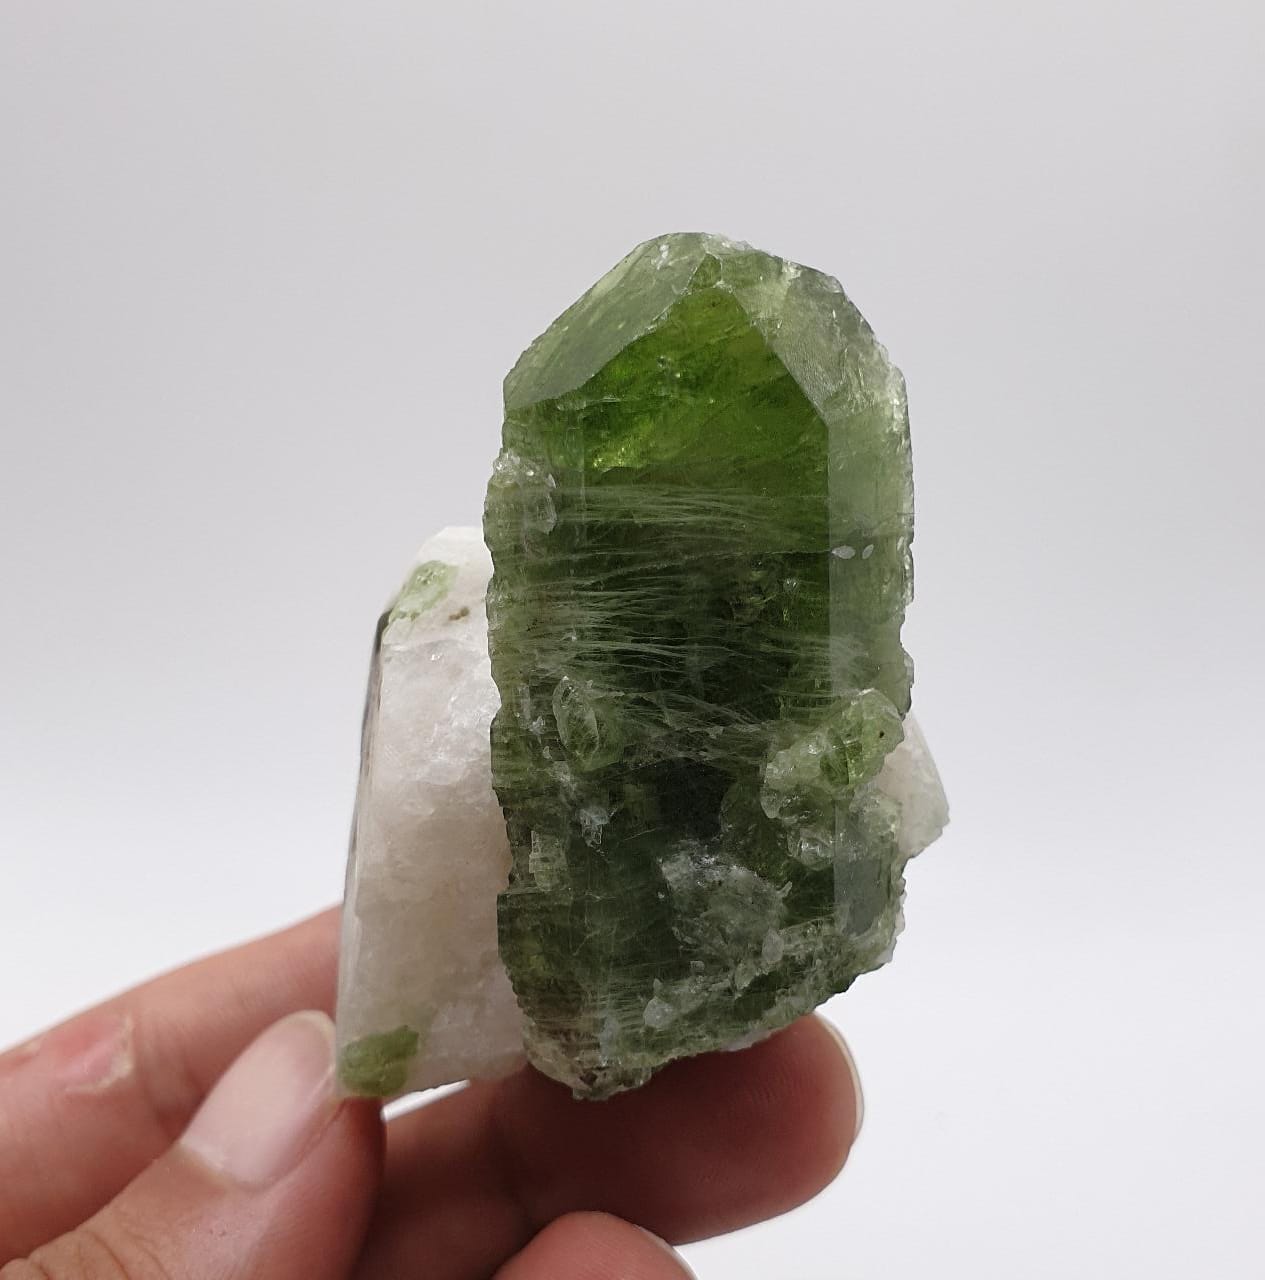 Apple-Green Gem Diopside Crystal On Creamy White Calcite